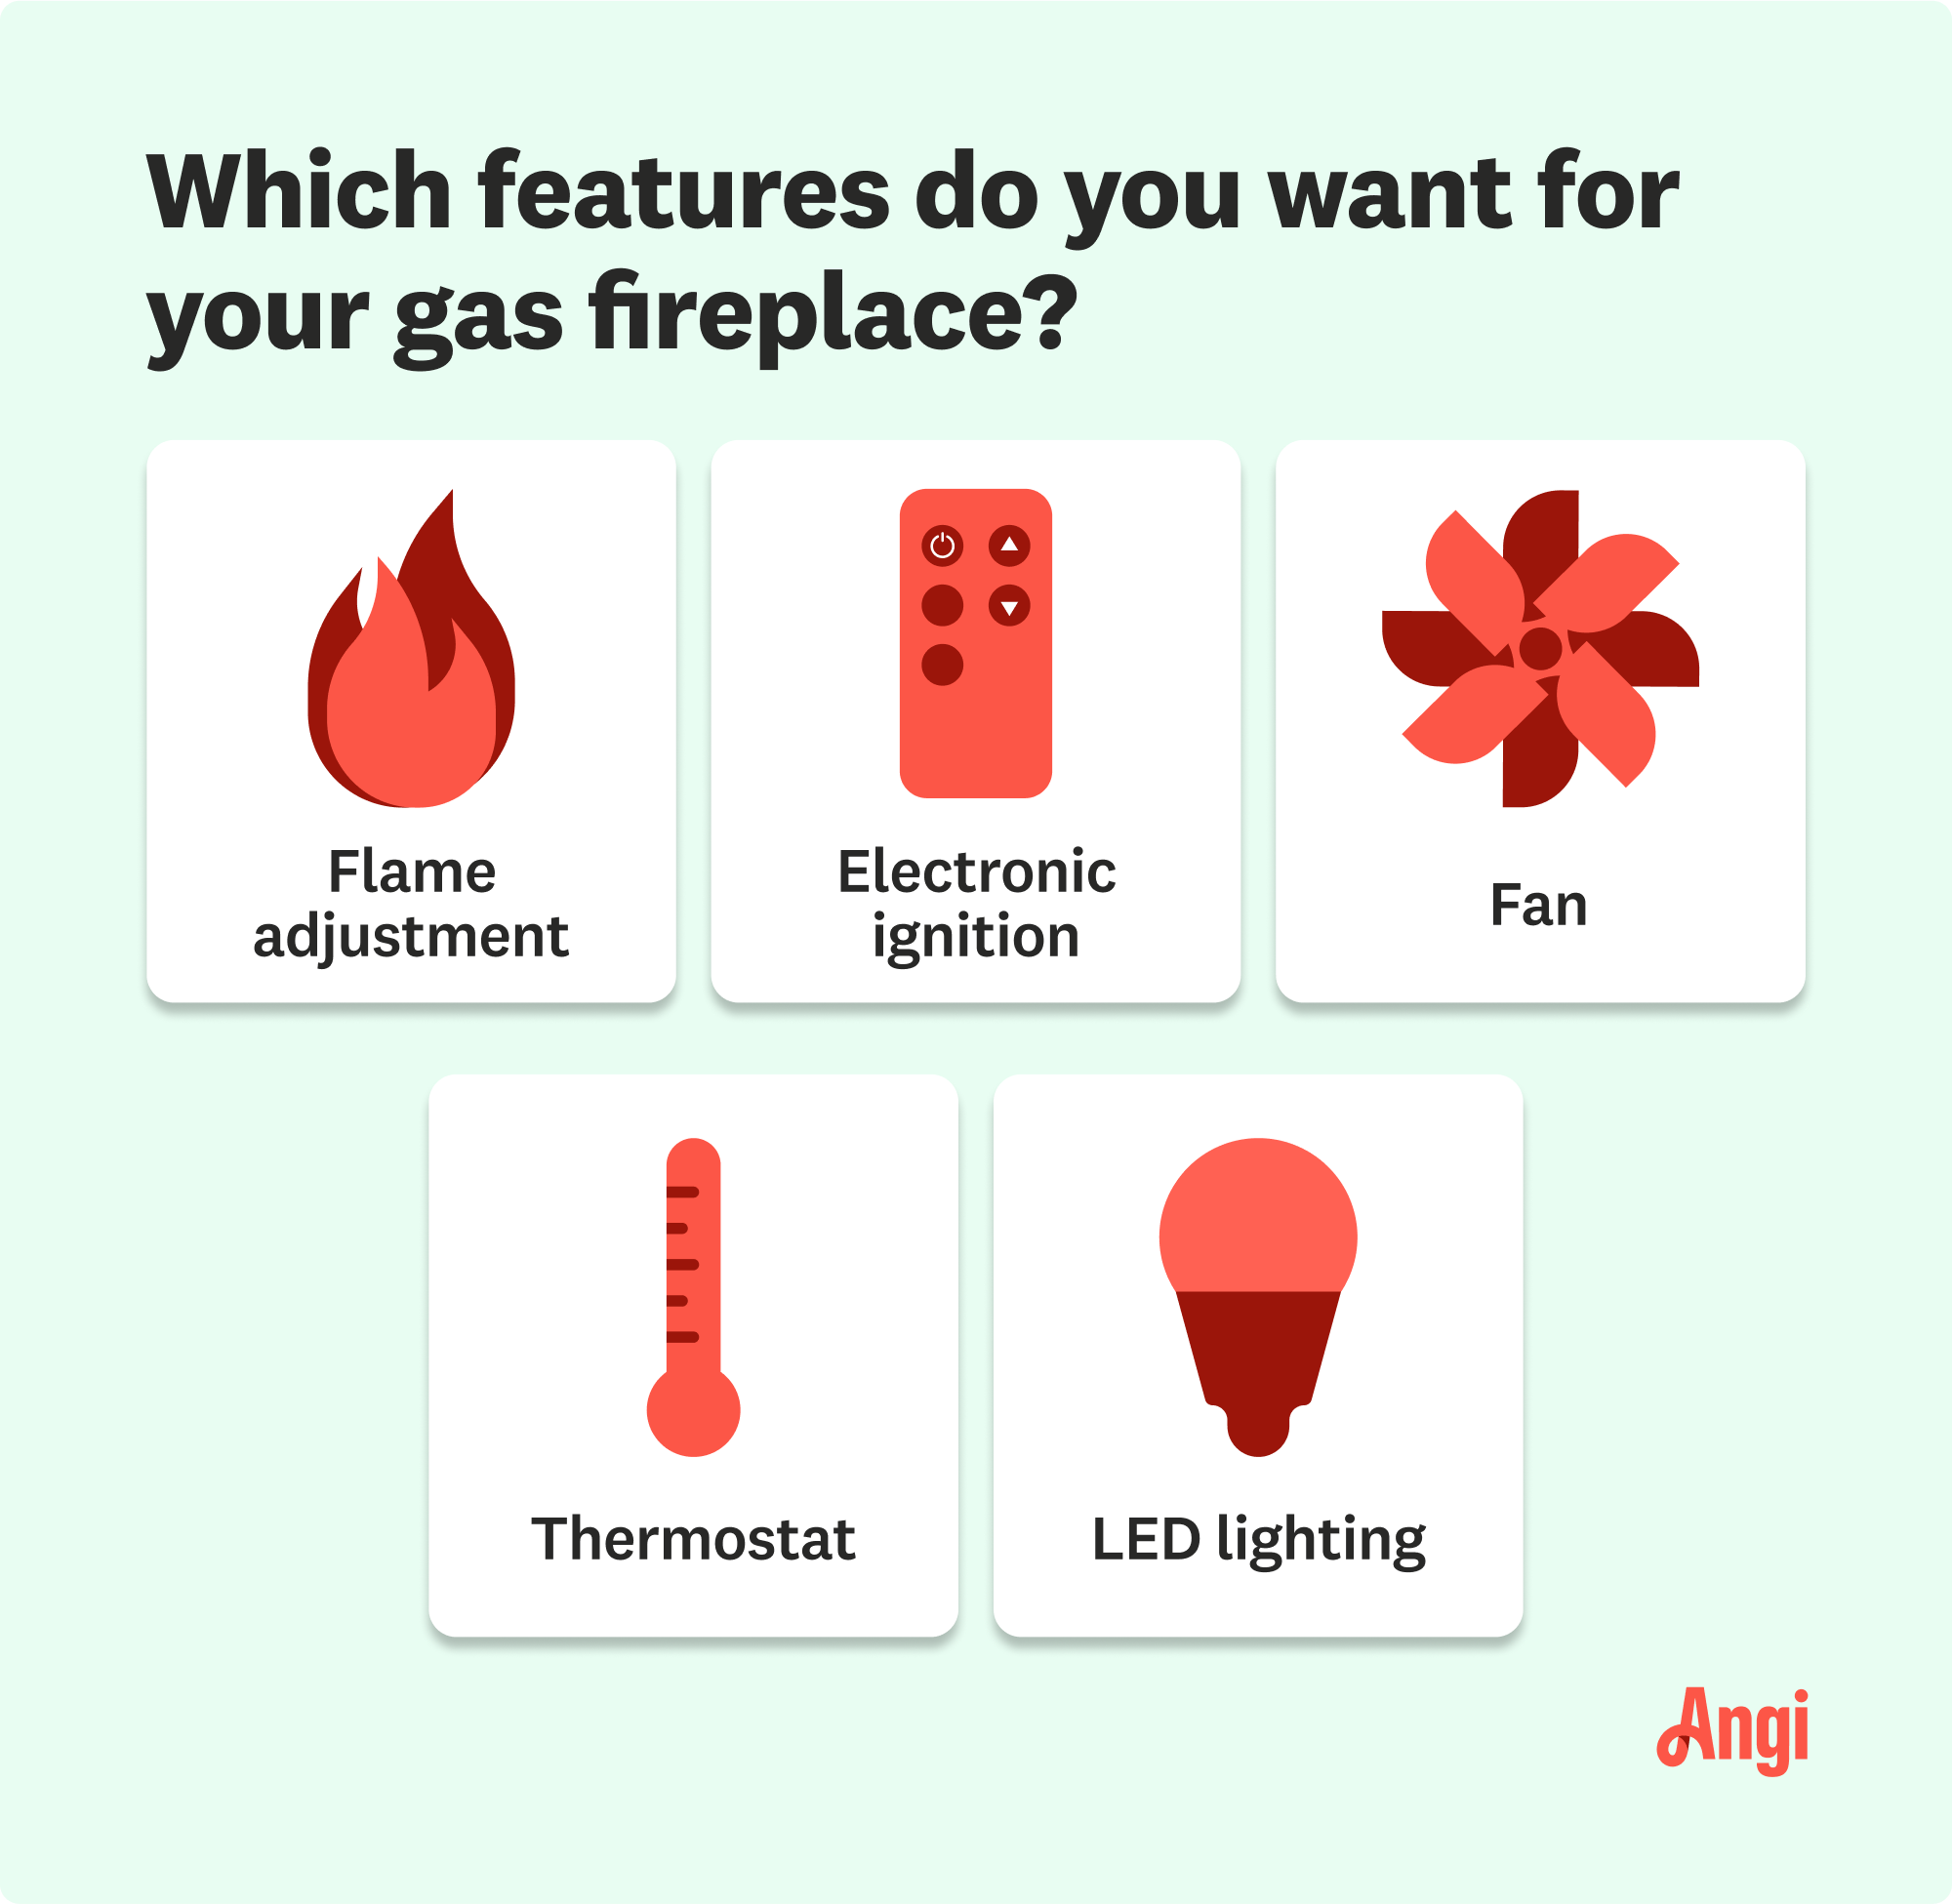 5 different features for a gas fireplace, including electronic ignition, fan, and led lighting